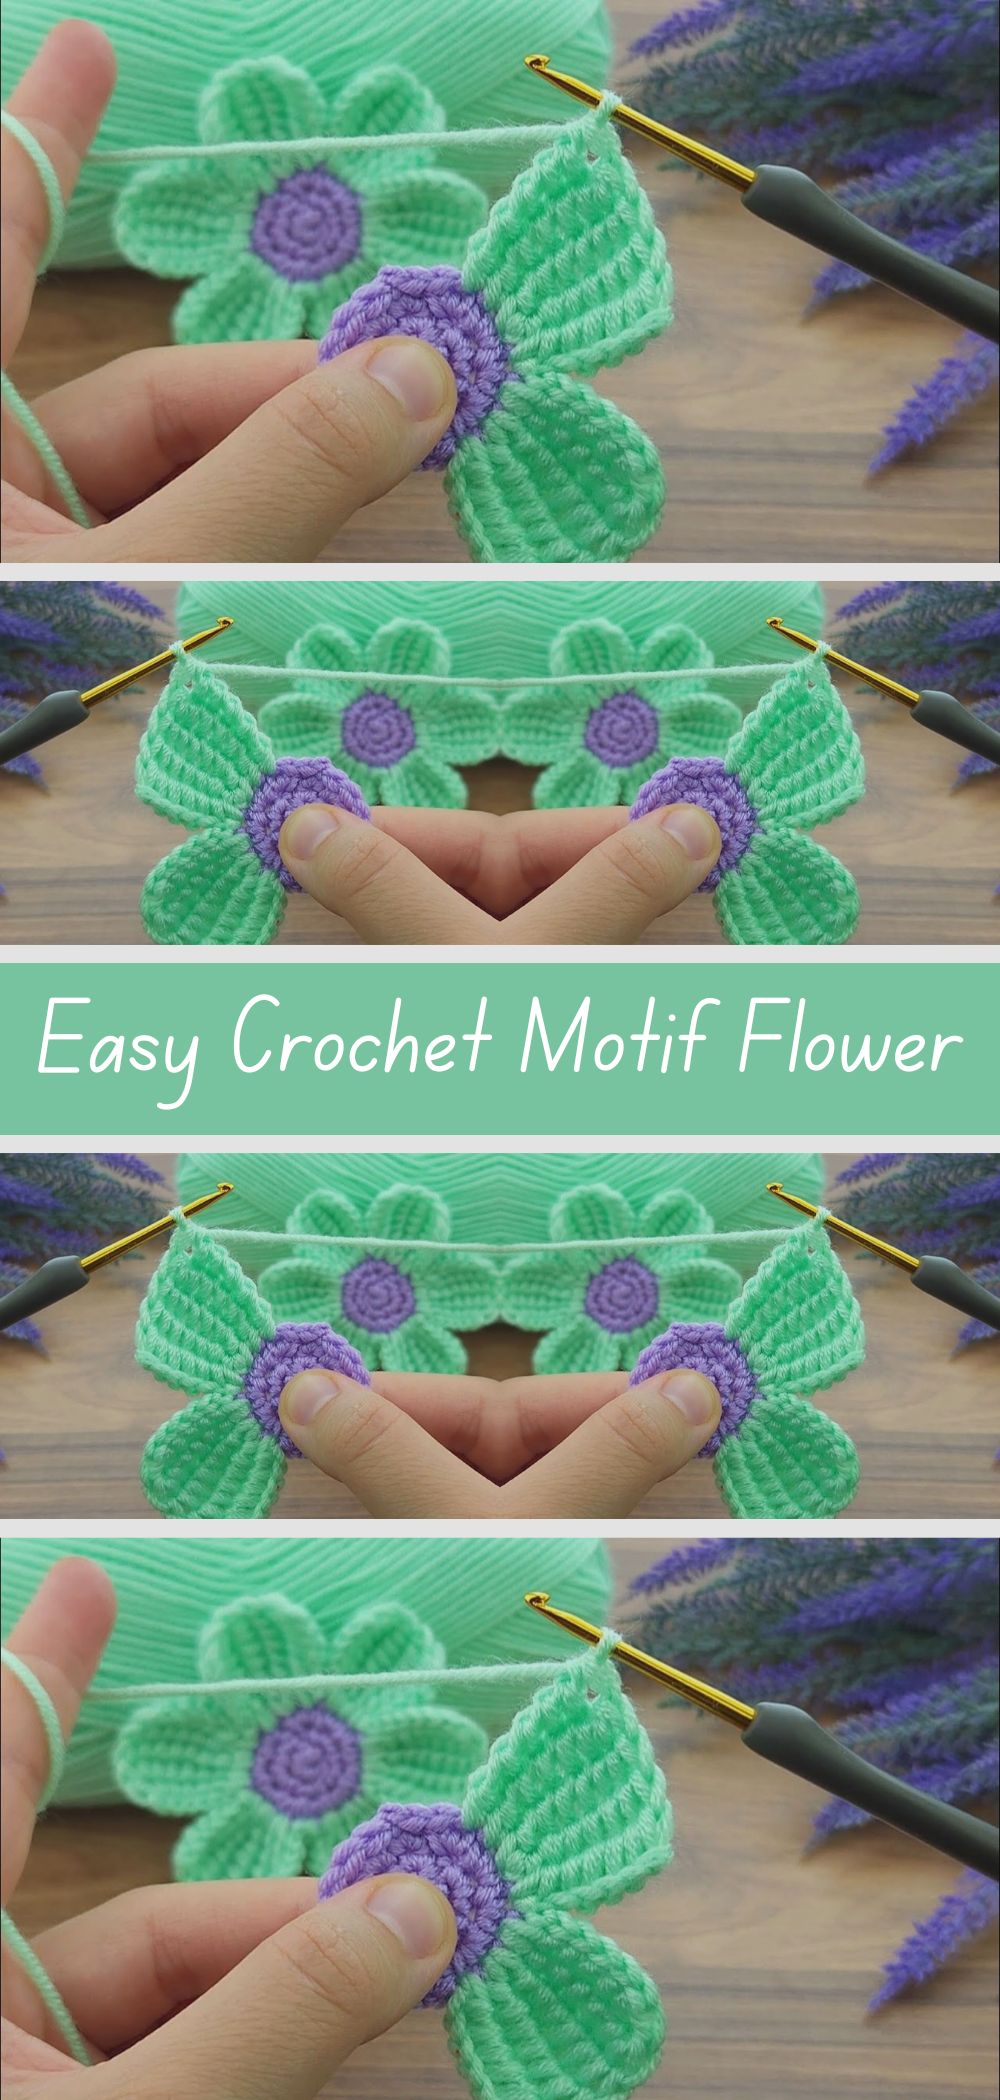 Free and easy crochet pattern for crafting charming flower motifs. Perfect for beginners. Download now and add handmade beauty to your projects!